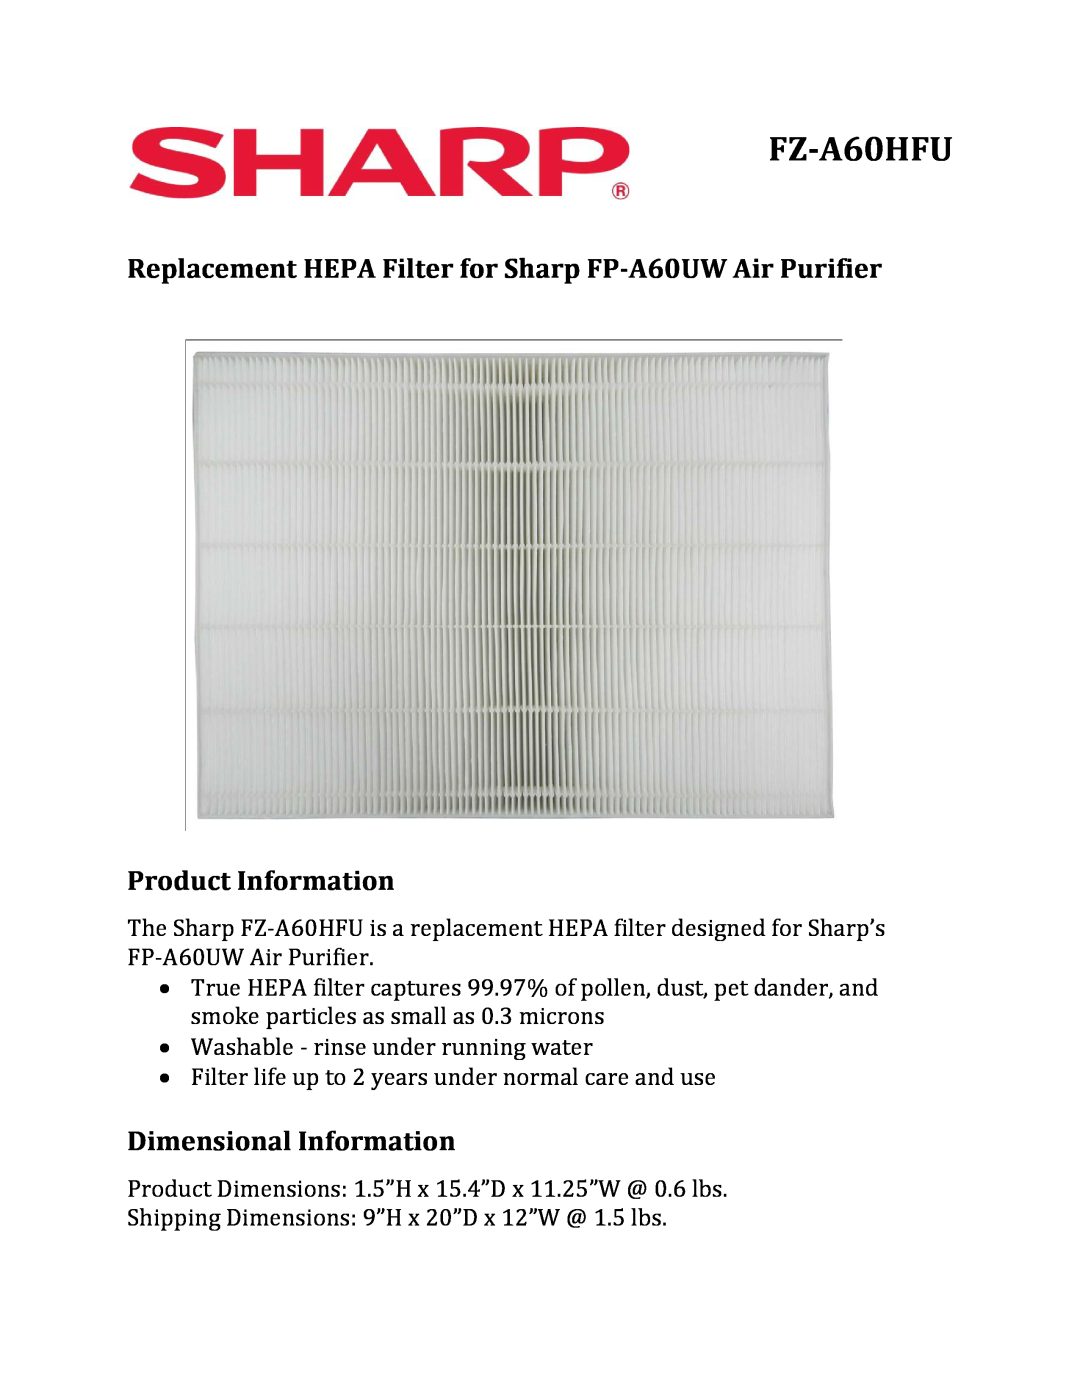 Sharp FZ-A60HFU dimensions Product Information, Dimensional Information 